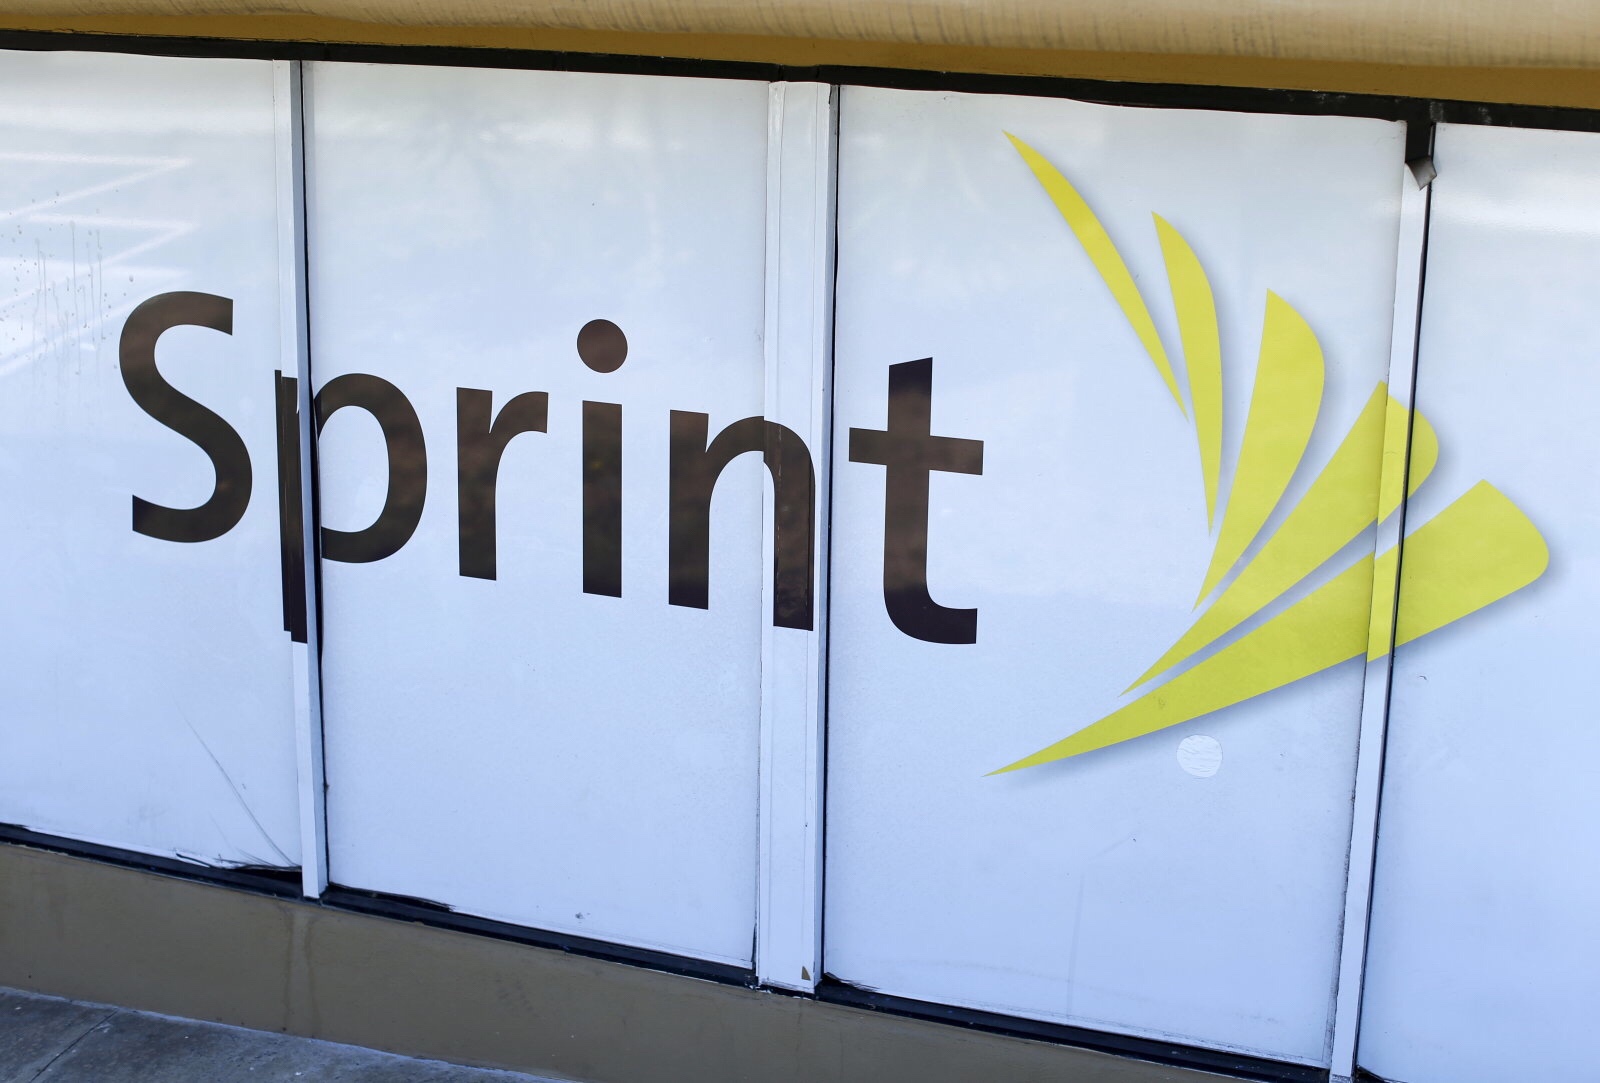 Sprint joins 5G race by planning infrastructure for six cities in 2018